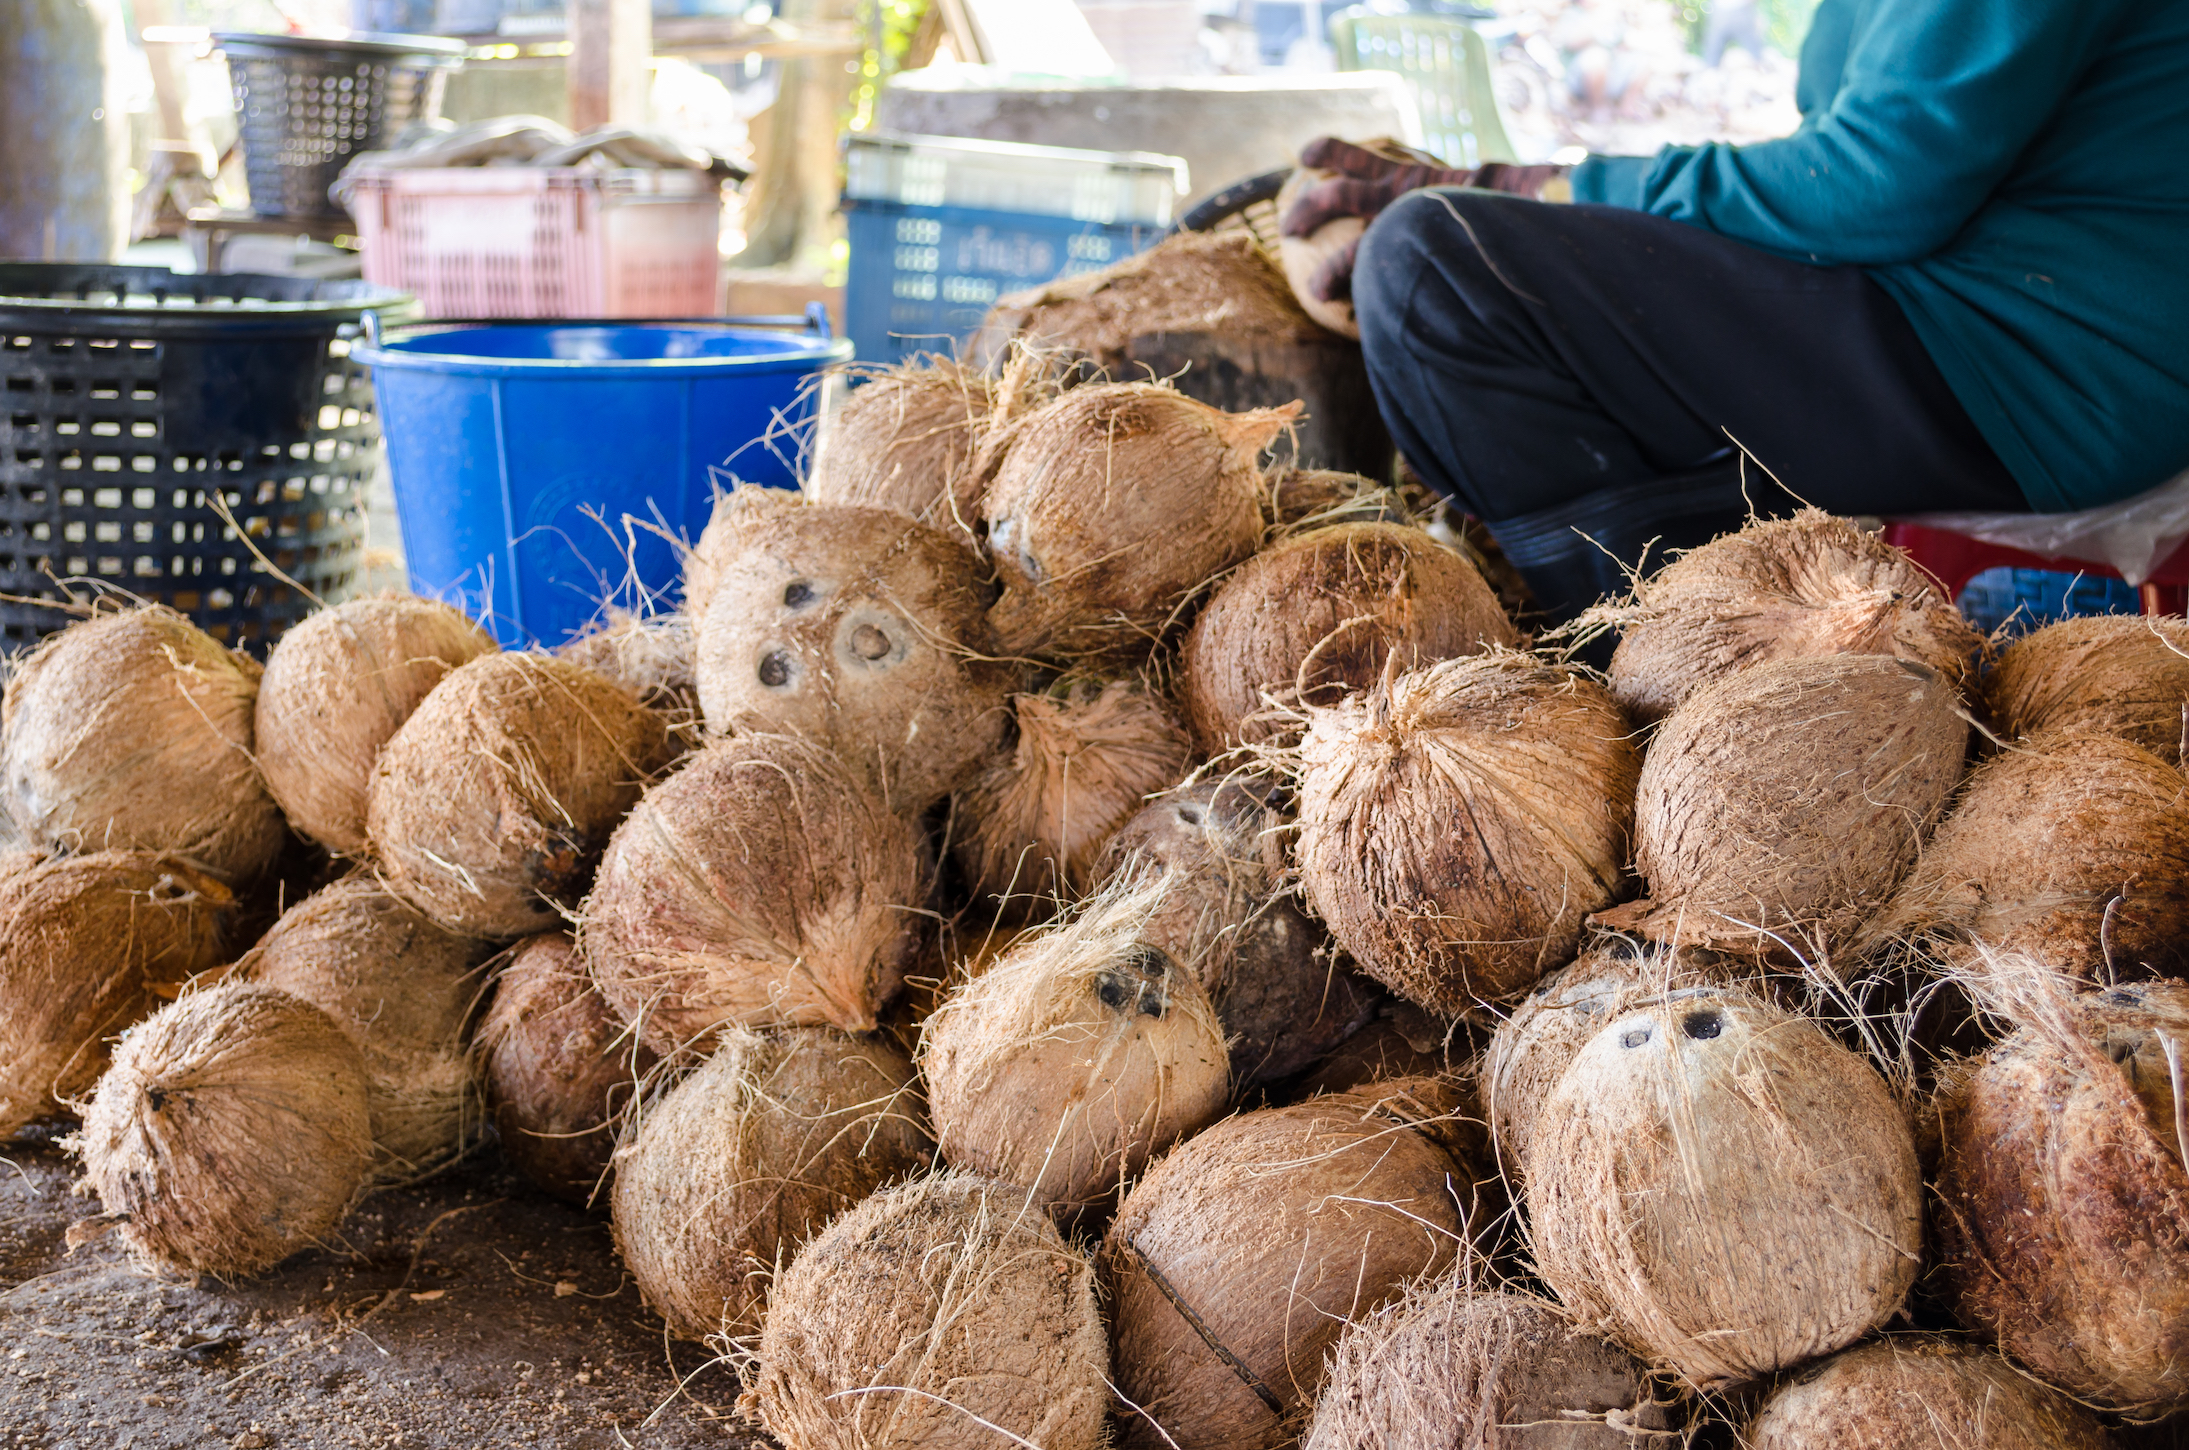 Farmer cutting coconut shell for processing agricultural products at a small factory in Thailand.